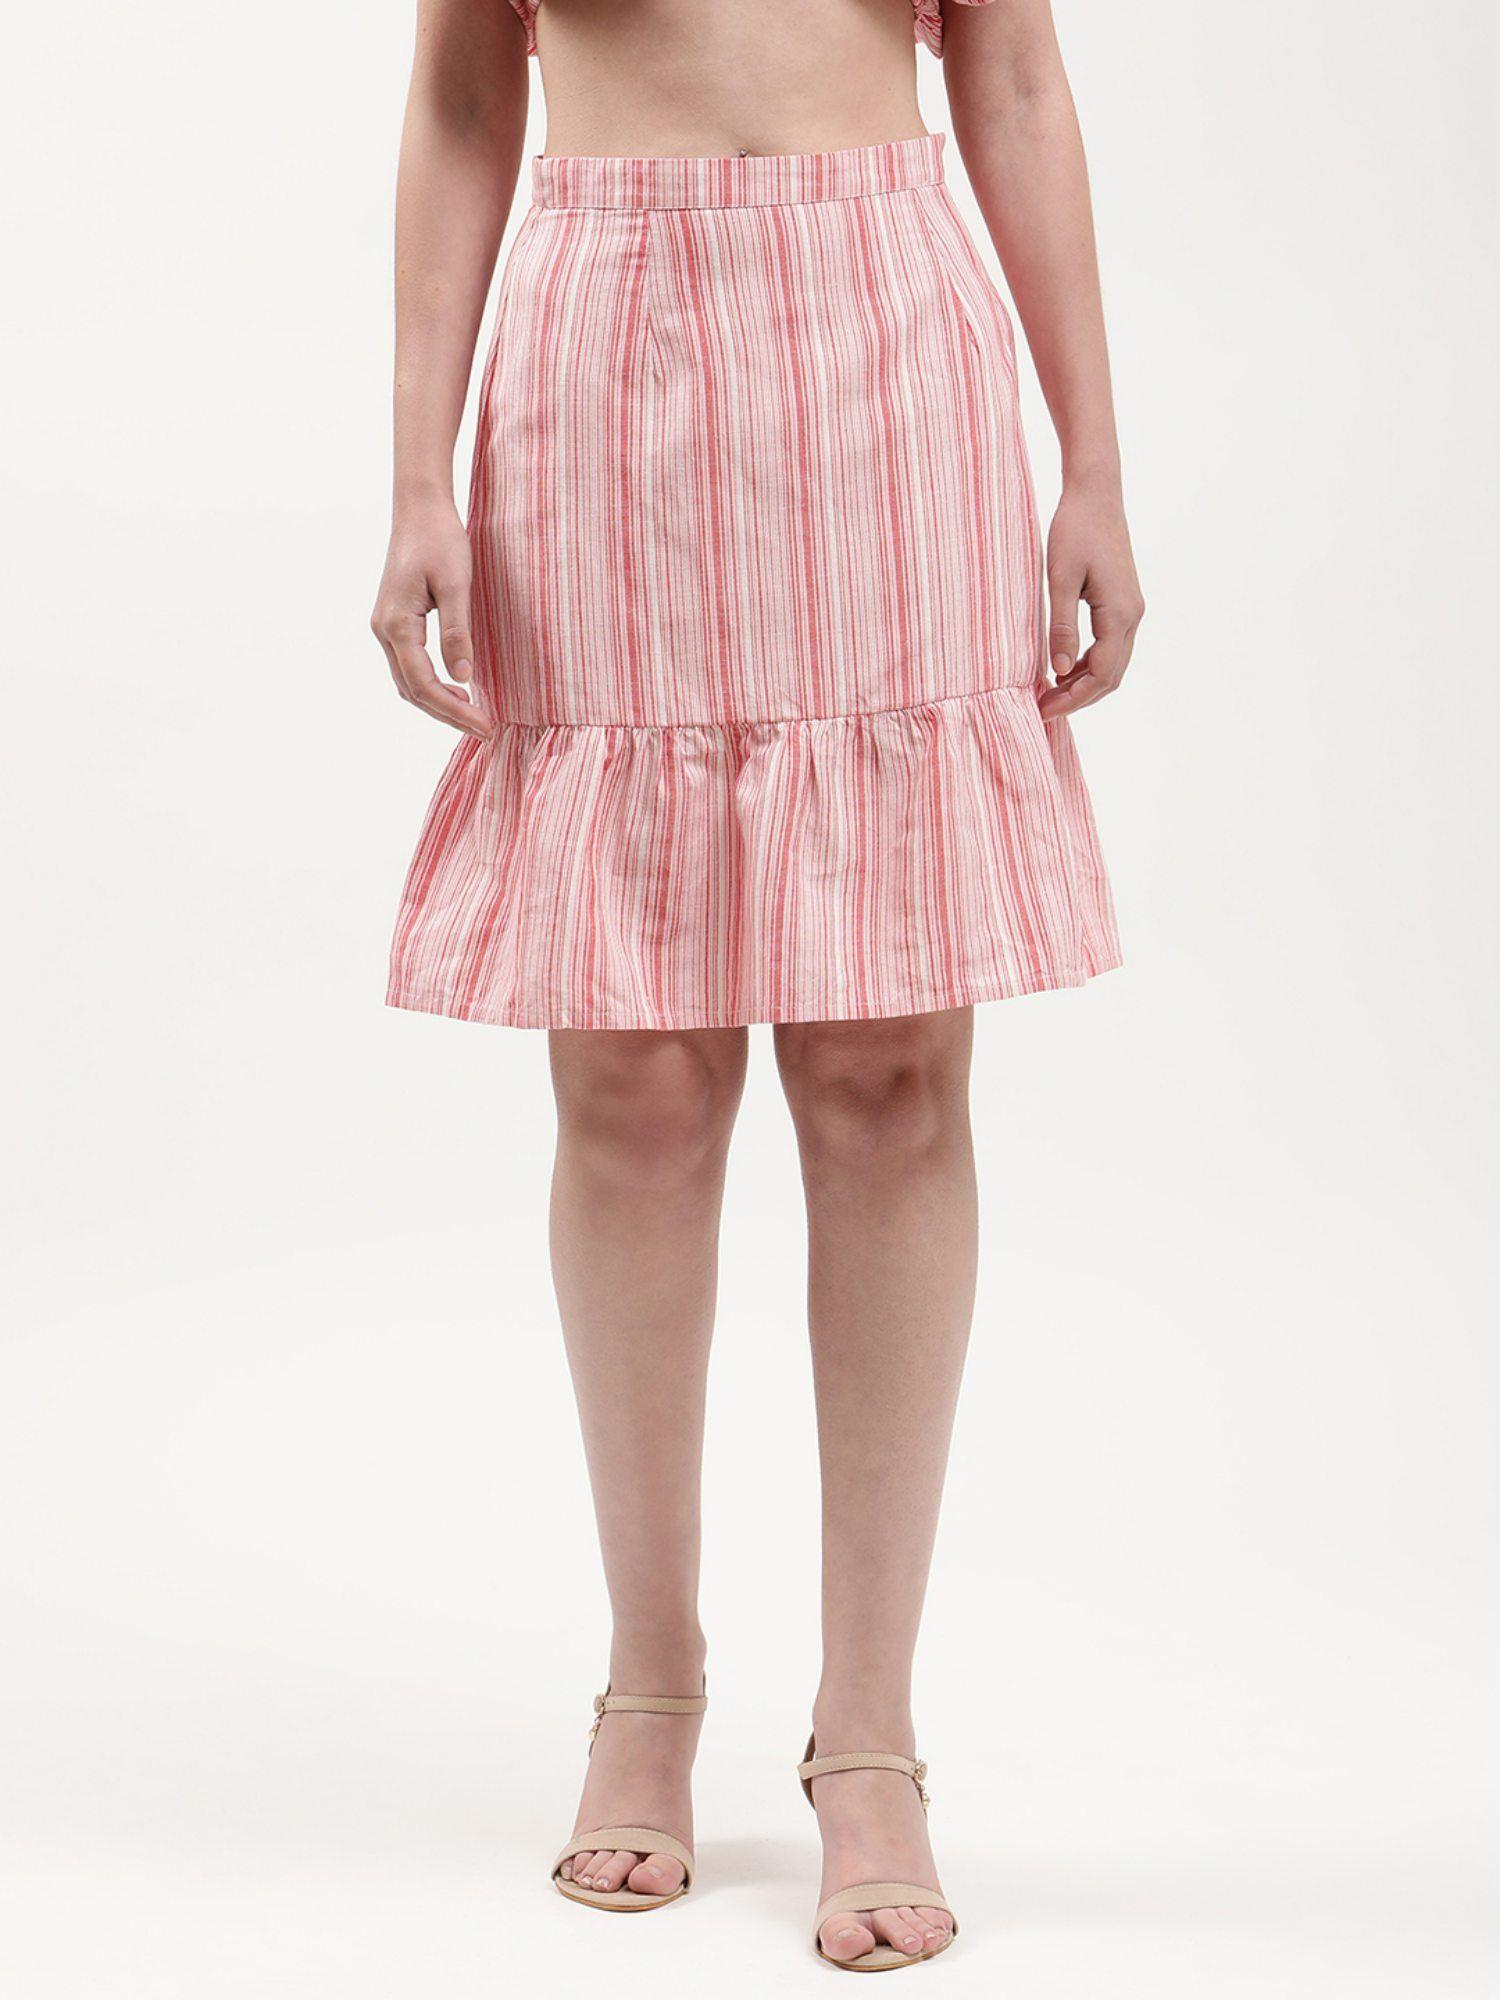 womens red striped skirt